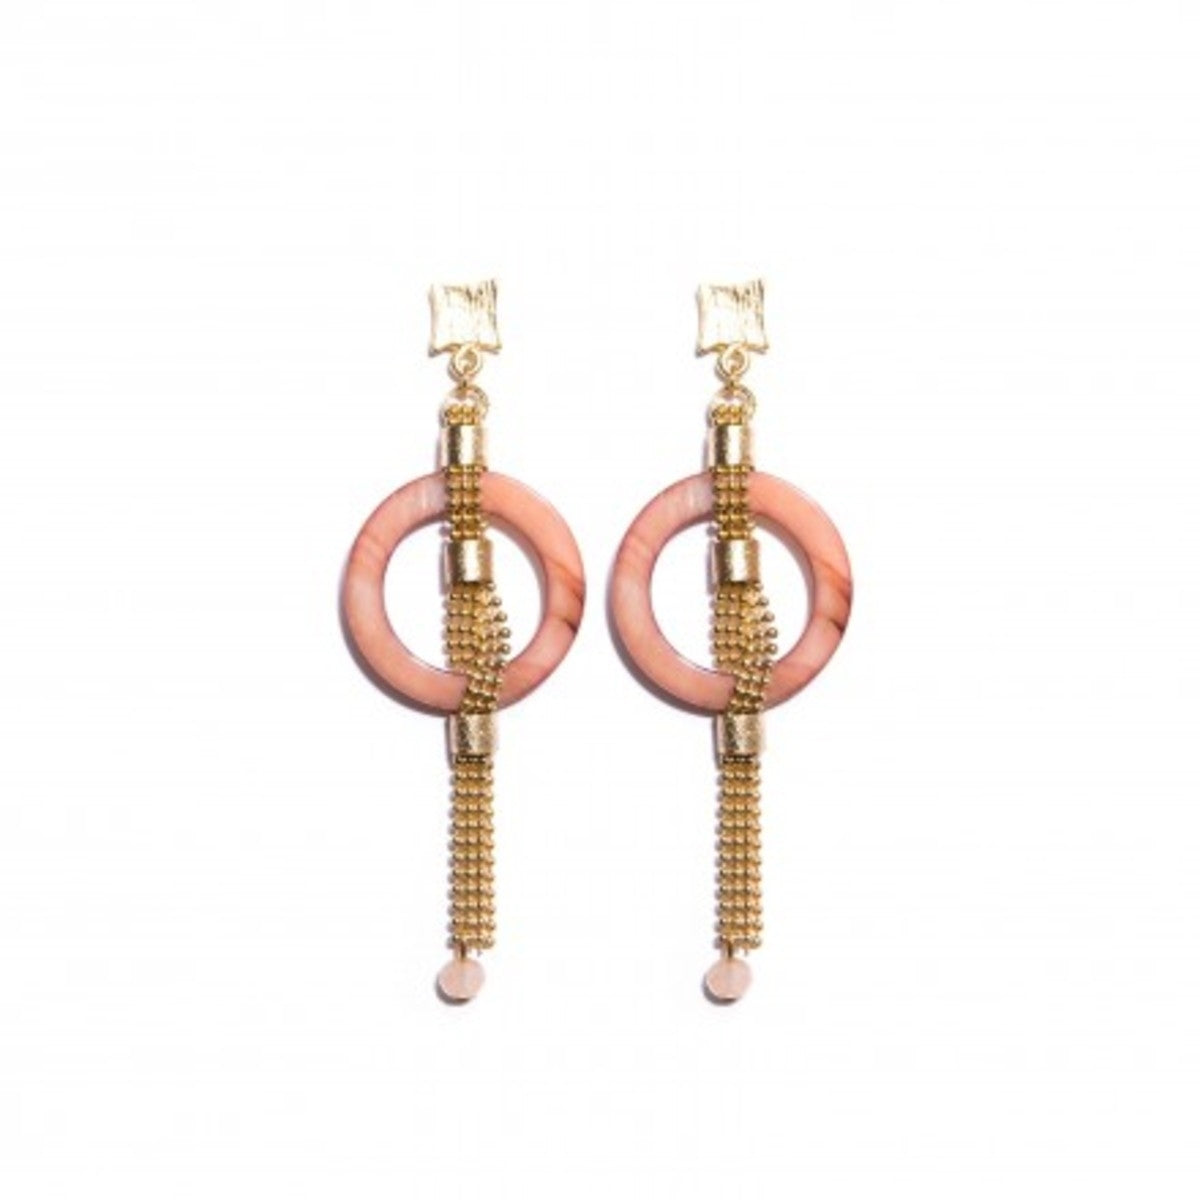 Long earring with guava mother-of-pearl hoop, crystal, and gold-plated chains